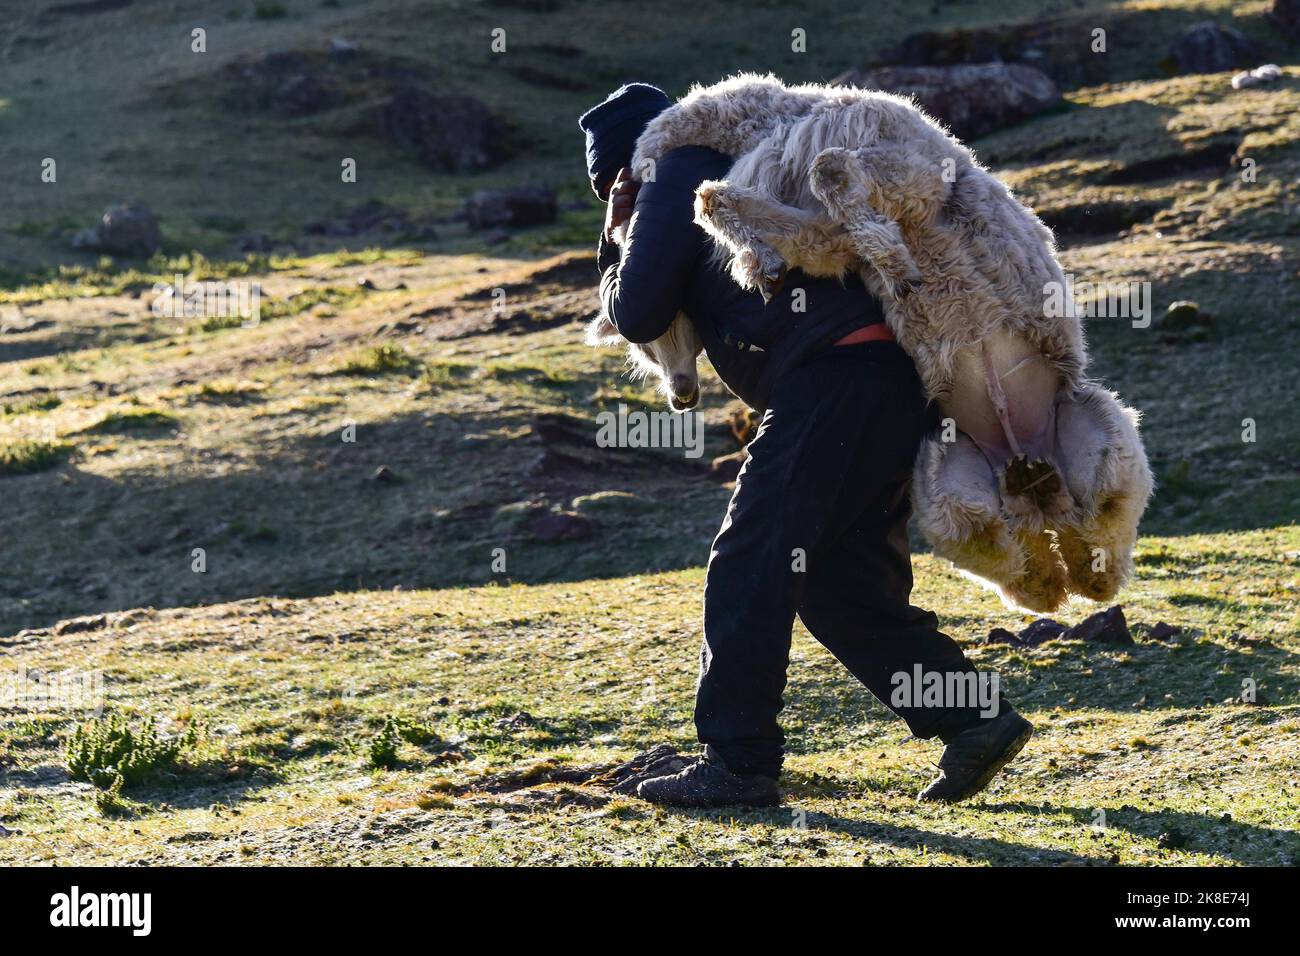 Indians carrying an alpaca (Vicugna pacos) for slaughter, Andes, near Cusco, Peru, South America Stock Photo